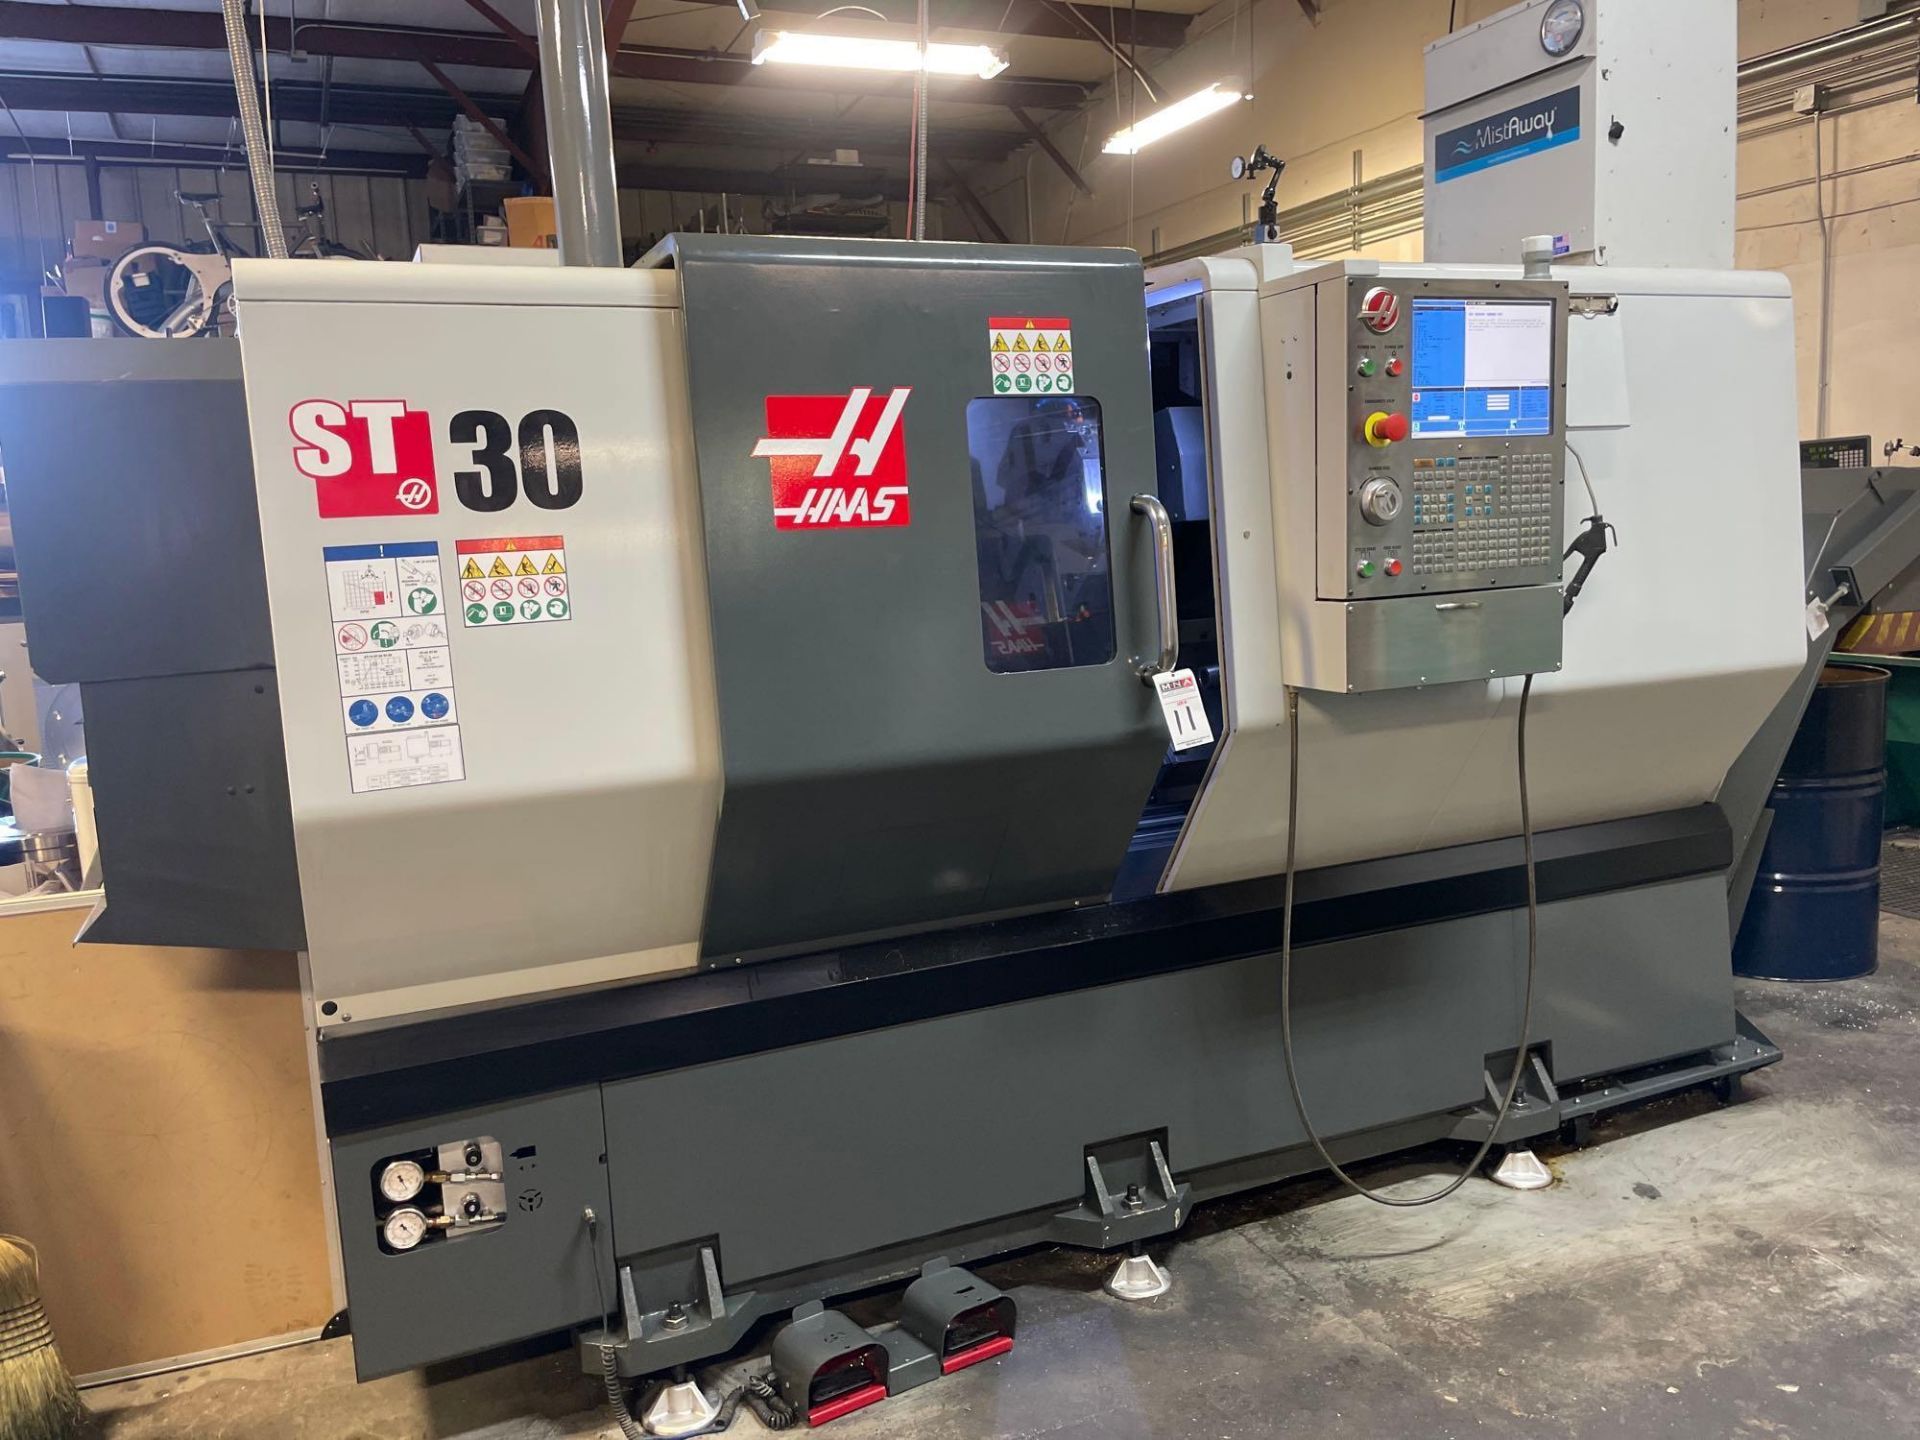 Haas ST-30 3-Axis CNC Lathe, C-Axis, 12" Hydraulic Chuck, 12 Position Turret, High Torque, New 2017 - Image 7 of 12